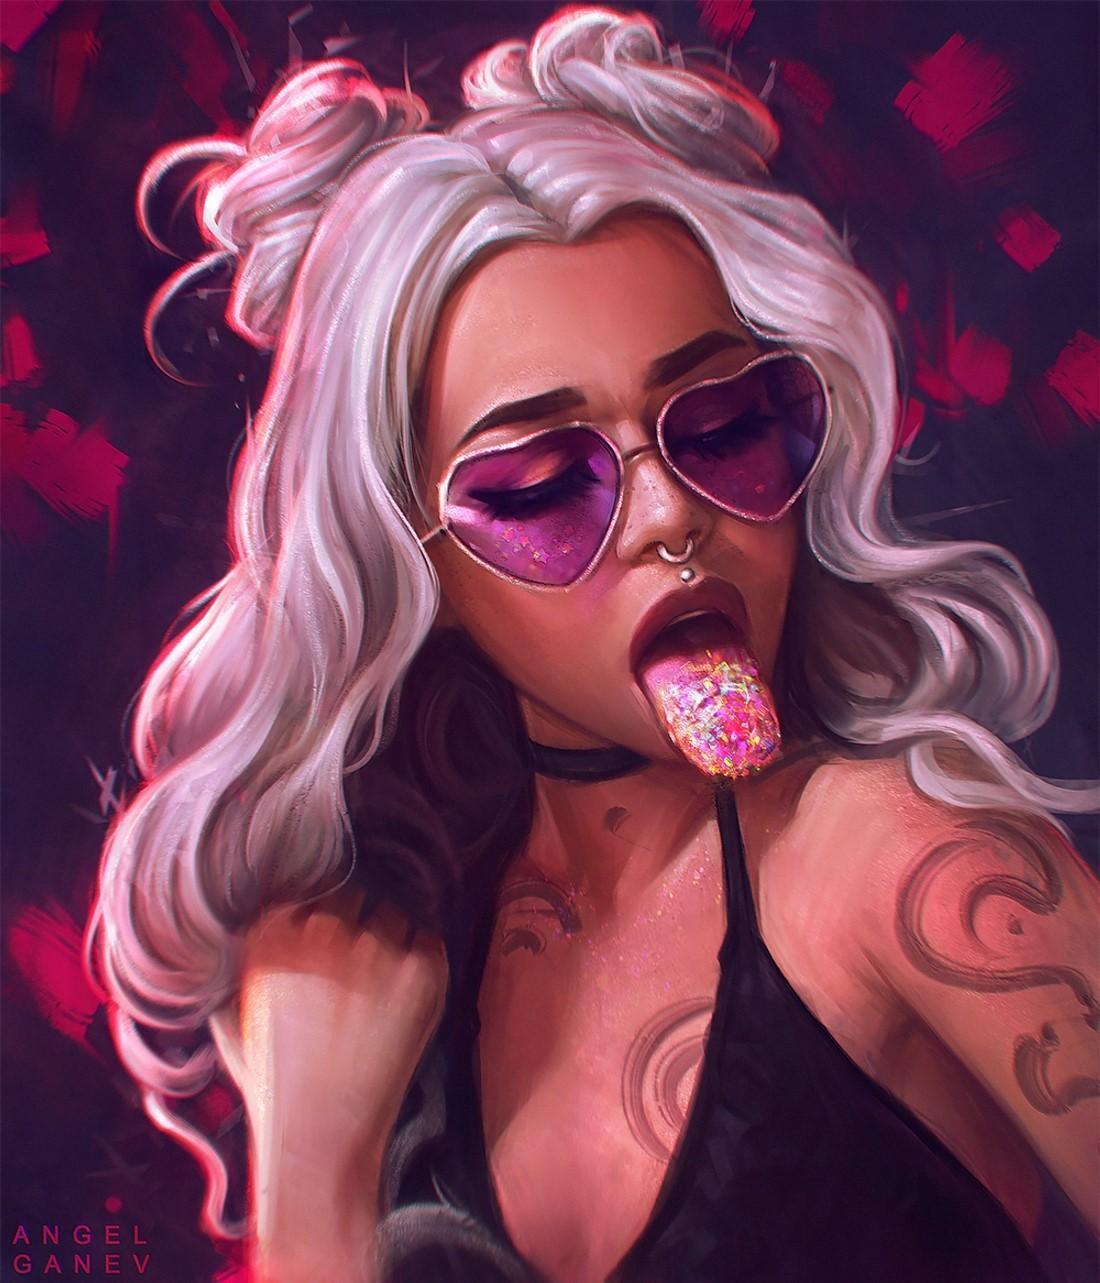 HD wallpaper, Digital Painting, Women, Necklace, Women With Shades, Cleavage, Angel Ganev, White Hair, Pierced Septum, Long Hair, Painting, Portrait, Drawing, Face, Tongue Out, Illustration, Artwork, Bare Shoulders, Black Tops, Tongues, Open Mouth, Digital Art